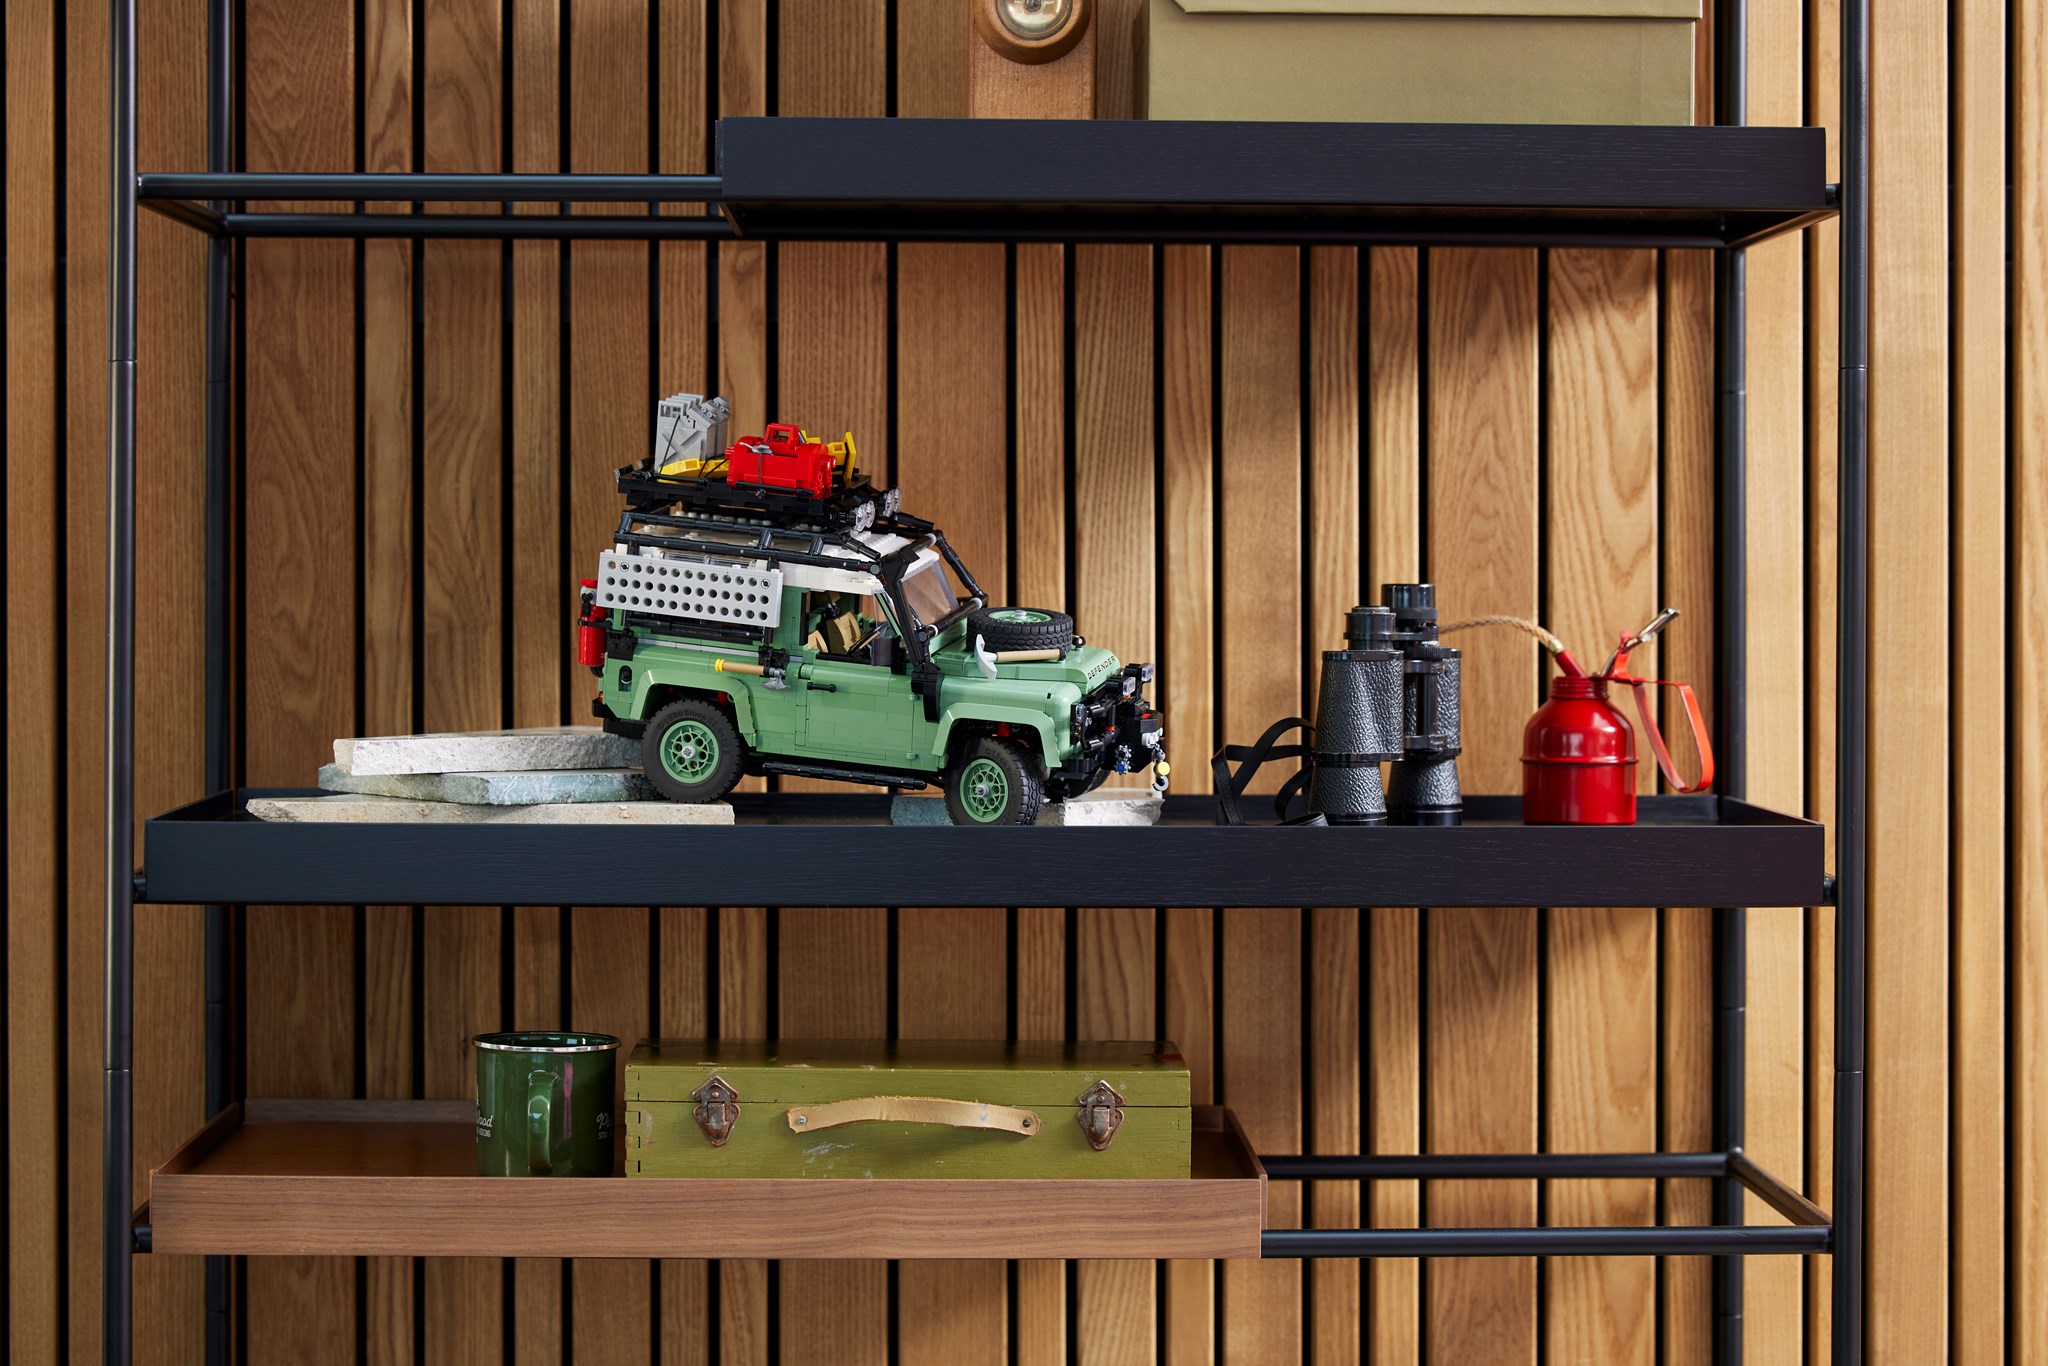 Lego Unveils a 2,573-Piece Model of the Reborn Land Rover Defender – Robb  Report